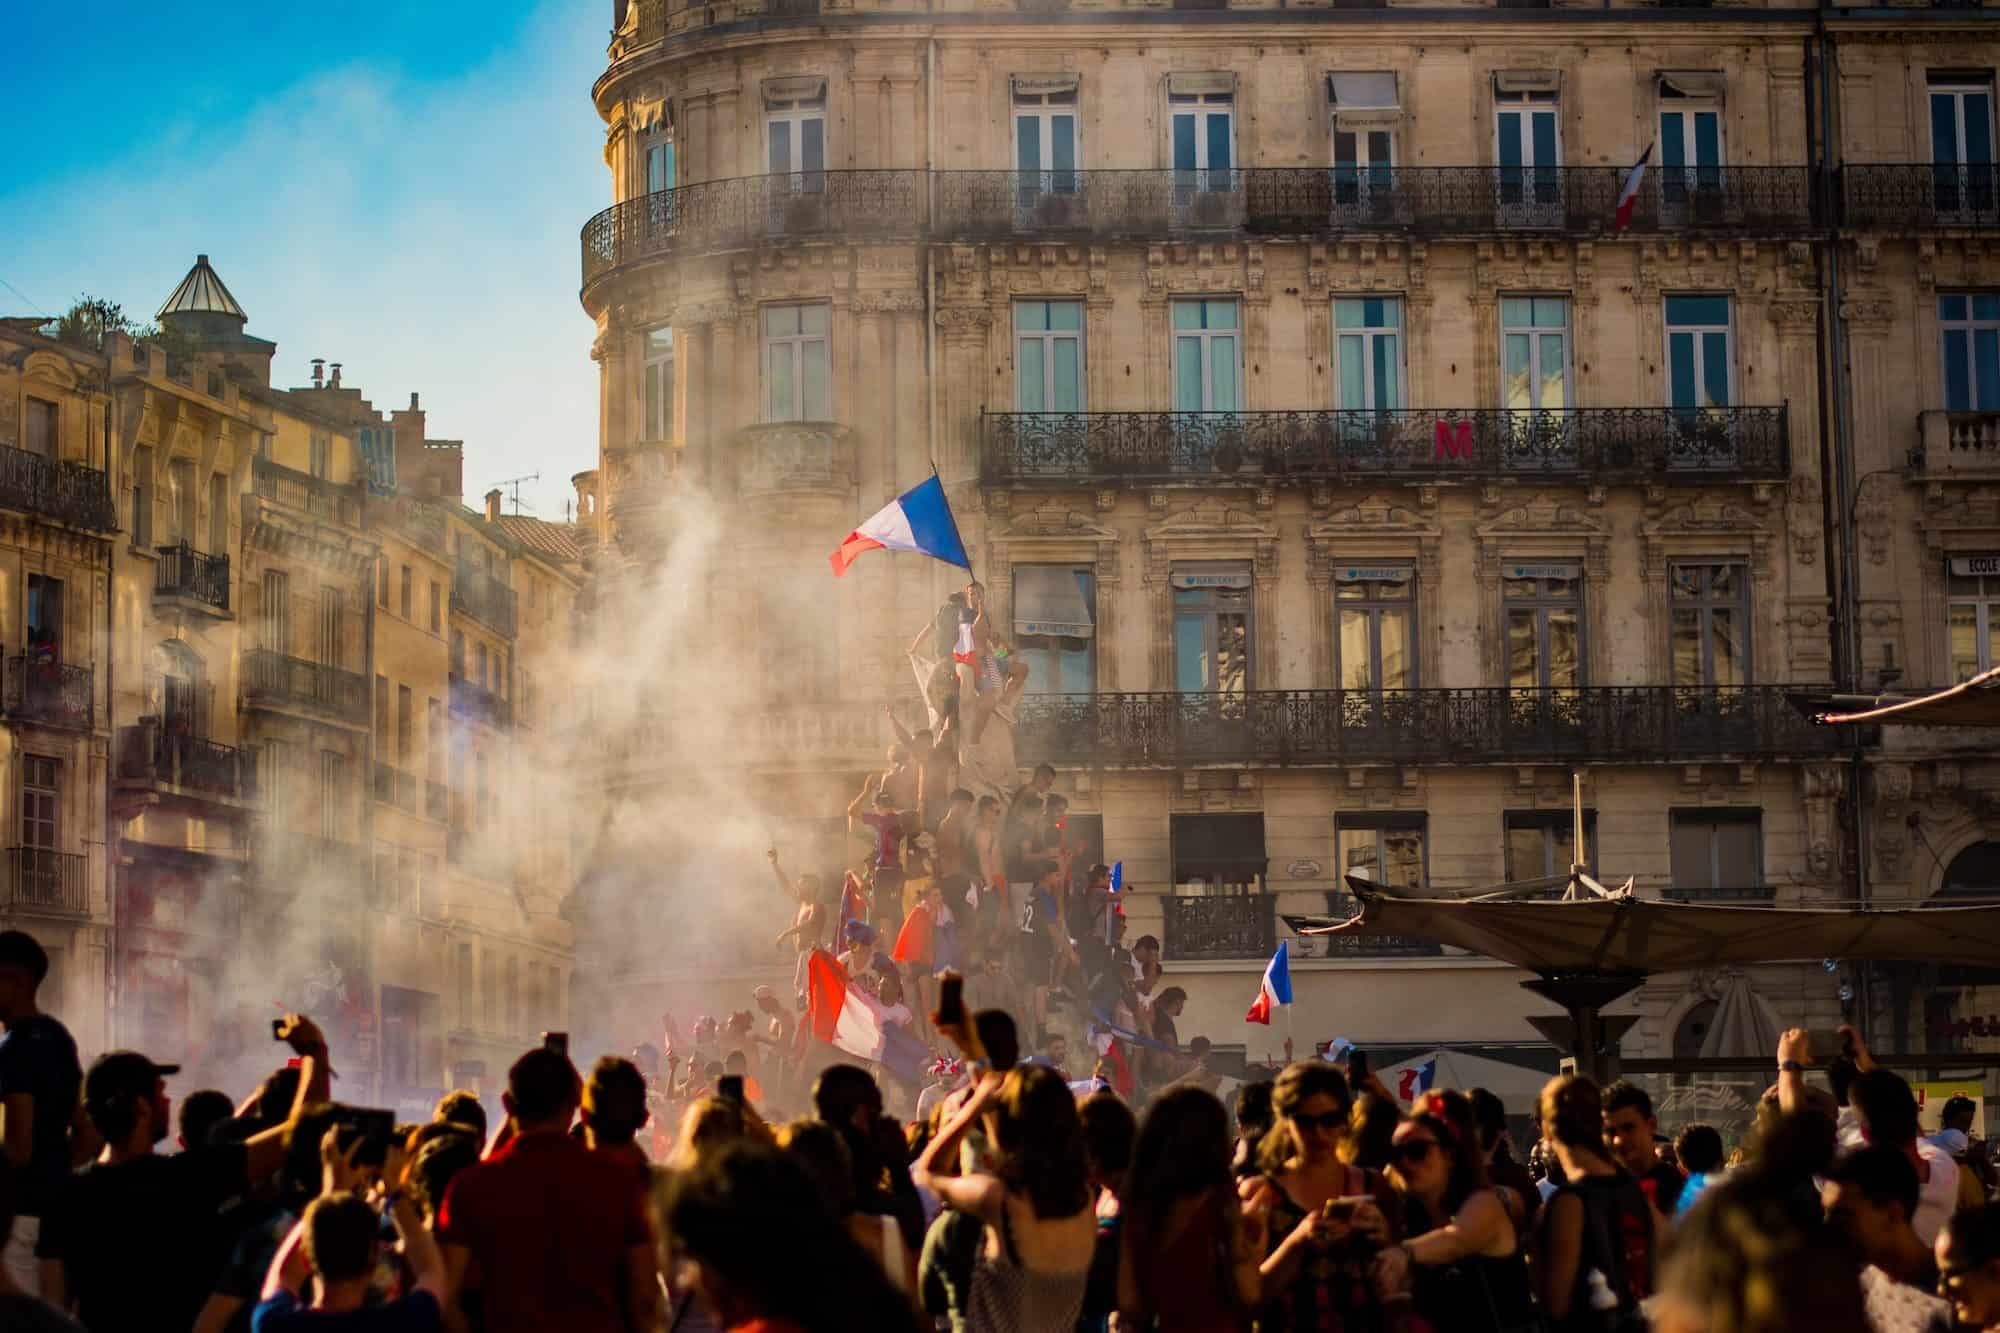 HiP Paris Blog tells the story of la rentrée, before which Paris summer is all about outdoor events like Bastille Day and Gay Pride.